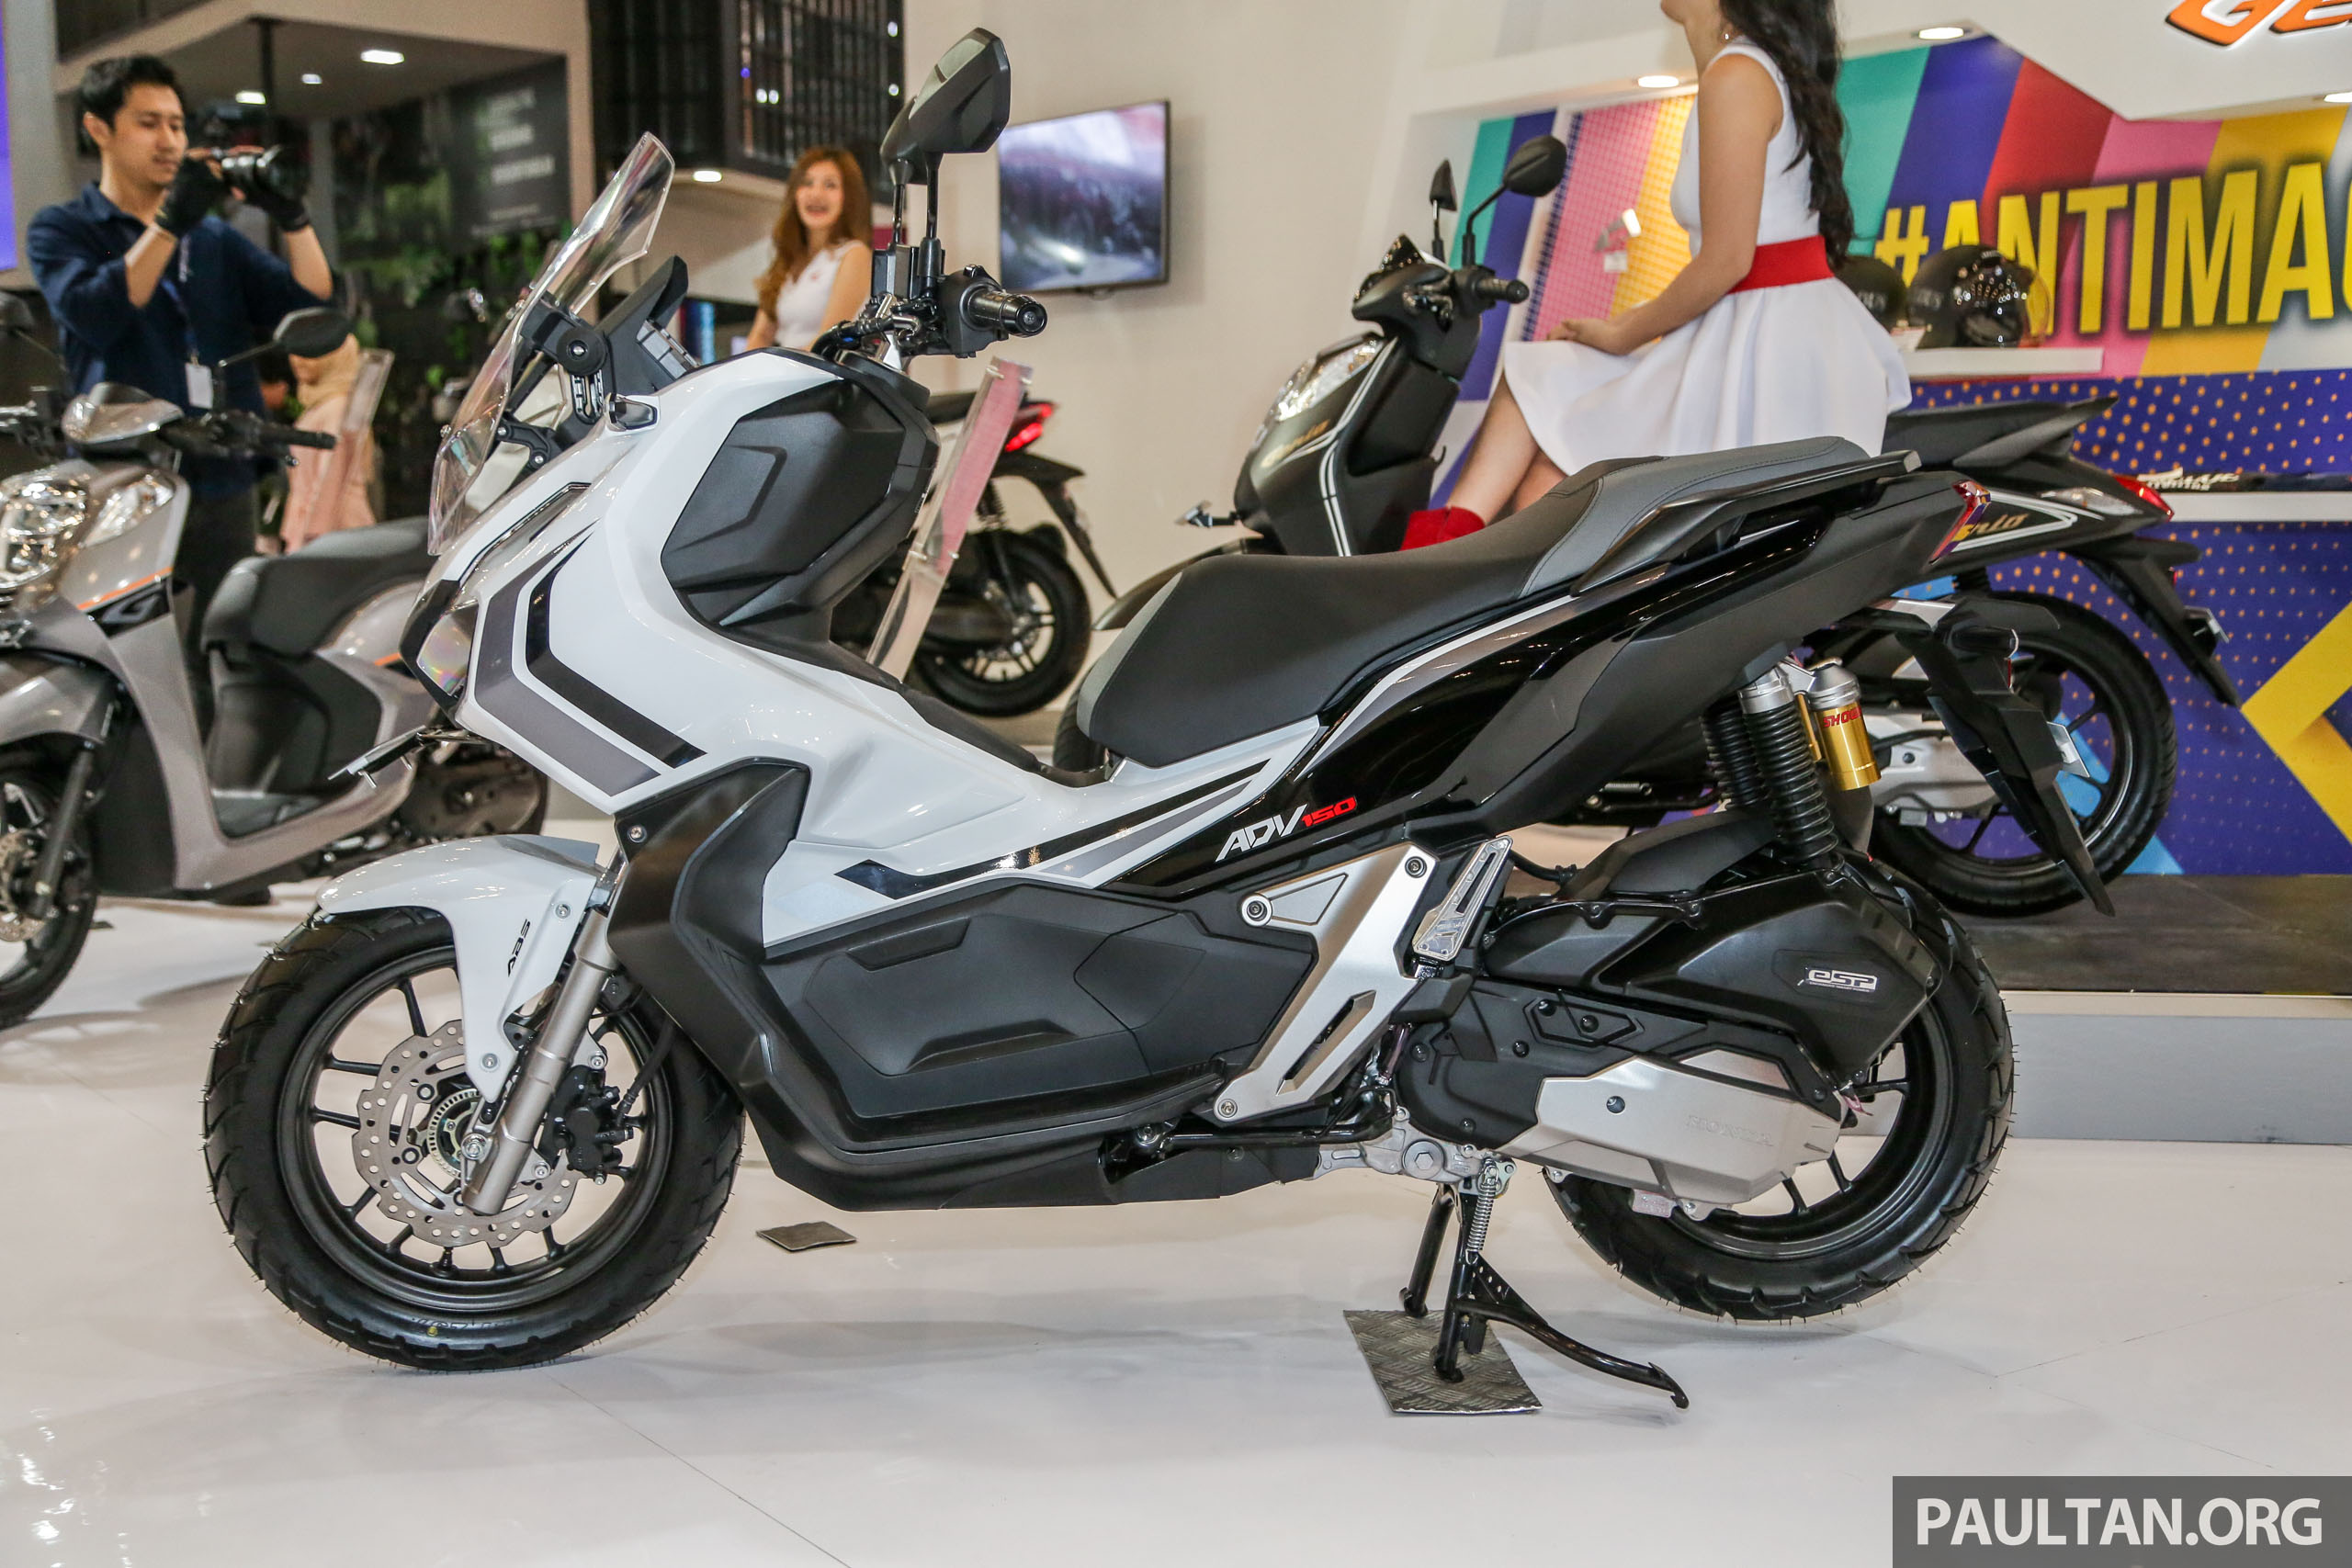 2019 Honda ADV 150 priced from RM9,908 in Indonesia Paul Tan - Image 989017